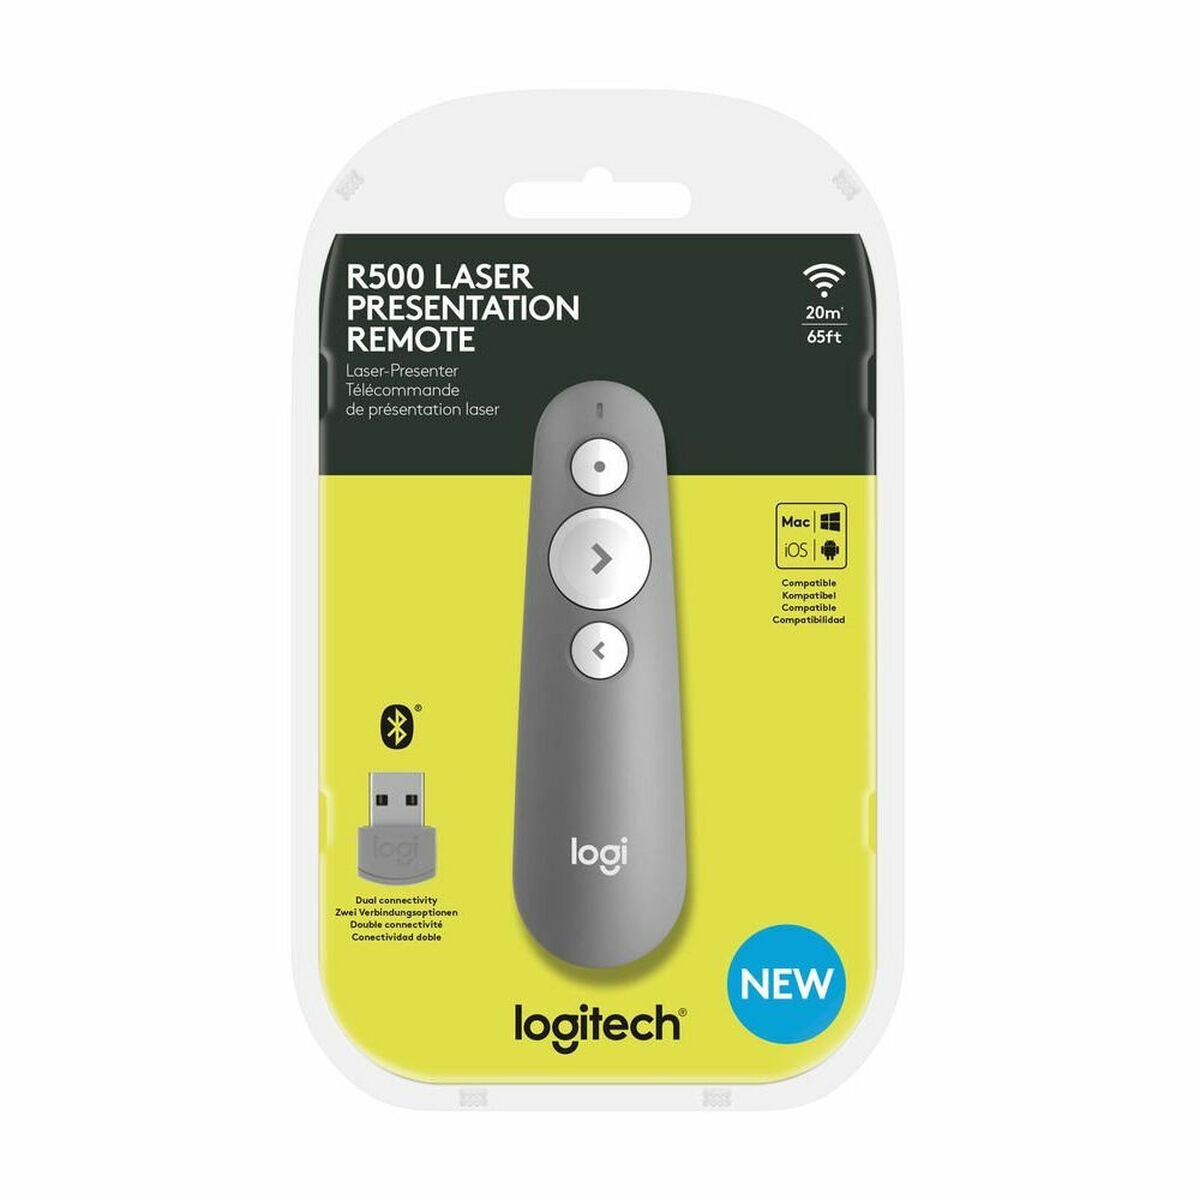 Laser Pointer Logitech R500S Grey, Logitech, Office and stationery, Office materials, laser-pointer-logitech-r500s-grey, Brand_Logitech, category-reference-2609, category-reference-2642, category-reference-2947, category-reference-t-11817, category-reference-t-11957, category-reference-t-19664, computers / peripherals, Condition_NEW, office, Price_50 - 100, vuelta al cole, RiotNook